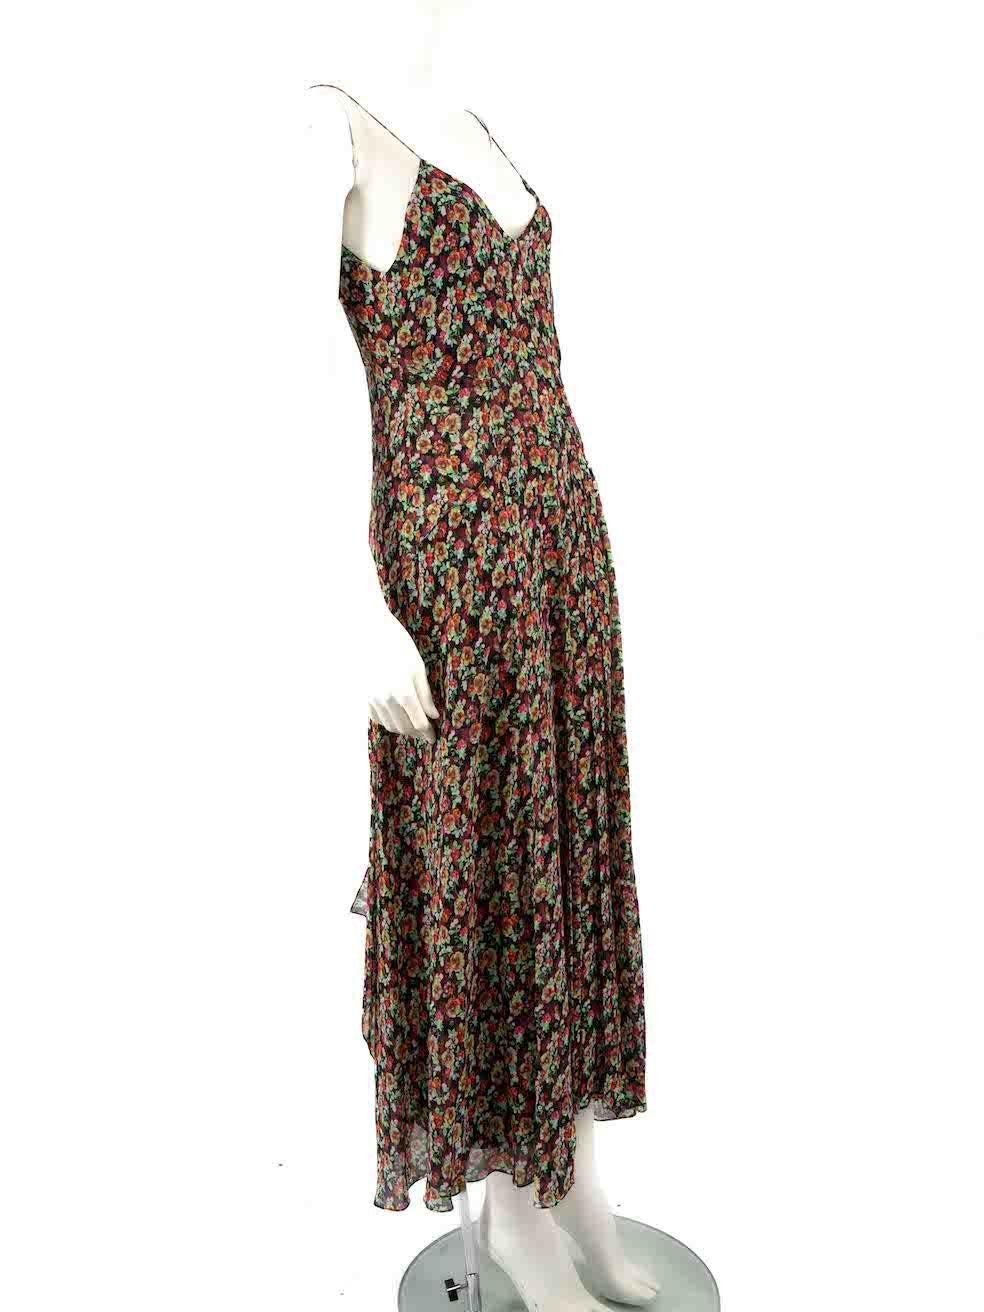 CONDITION is Very good. Hardly any visible wear to dress is evident on this used Victoria Beckham designer resale item.
 
 
 
 Details
 
 
 Multicolour
 
 Silk
 
 Dress
 
 Floral print
 
 Sleeveless
 
 Midi
 
 Pleated skirt
 
 Back zip and hook